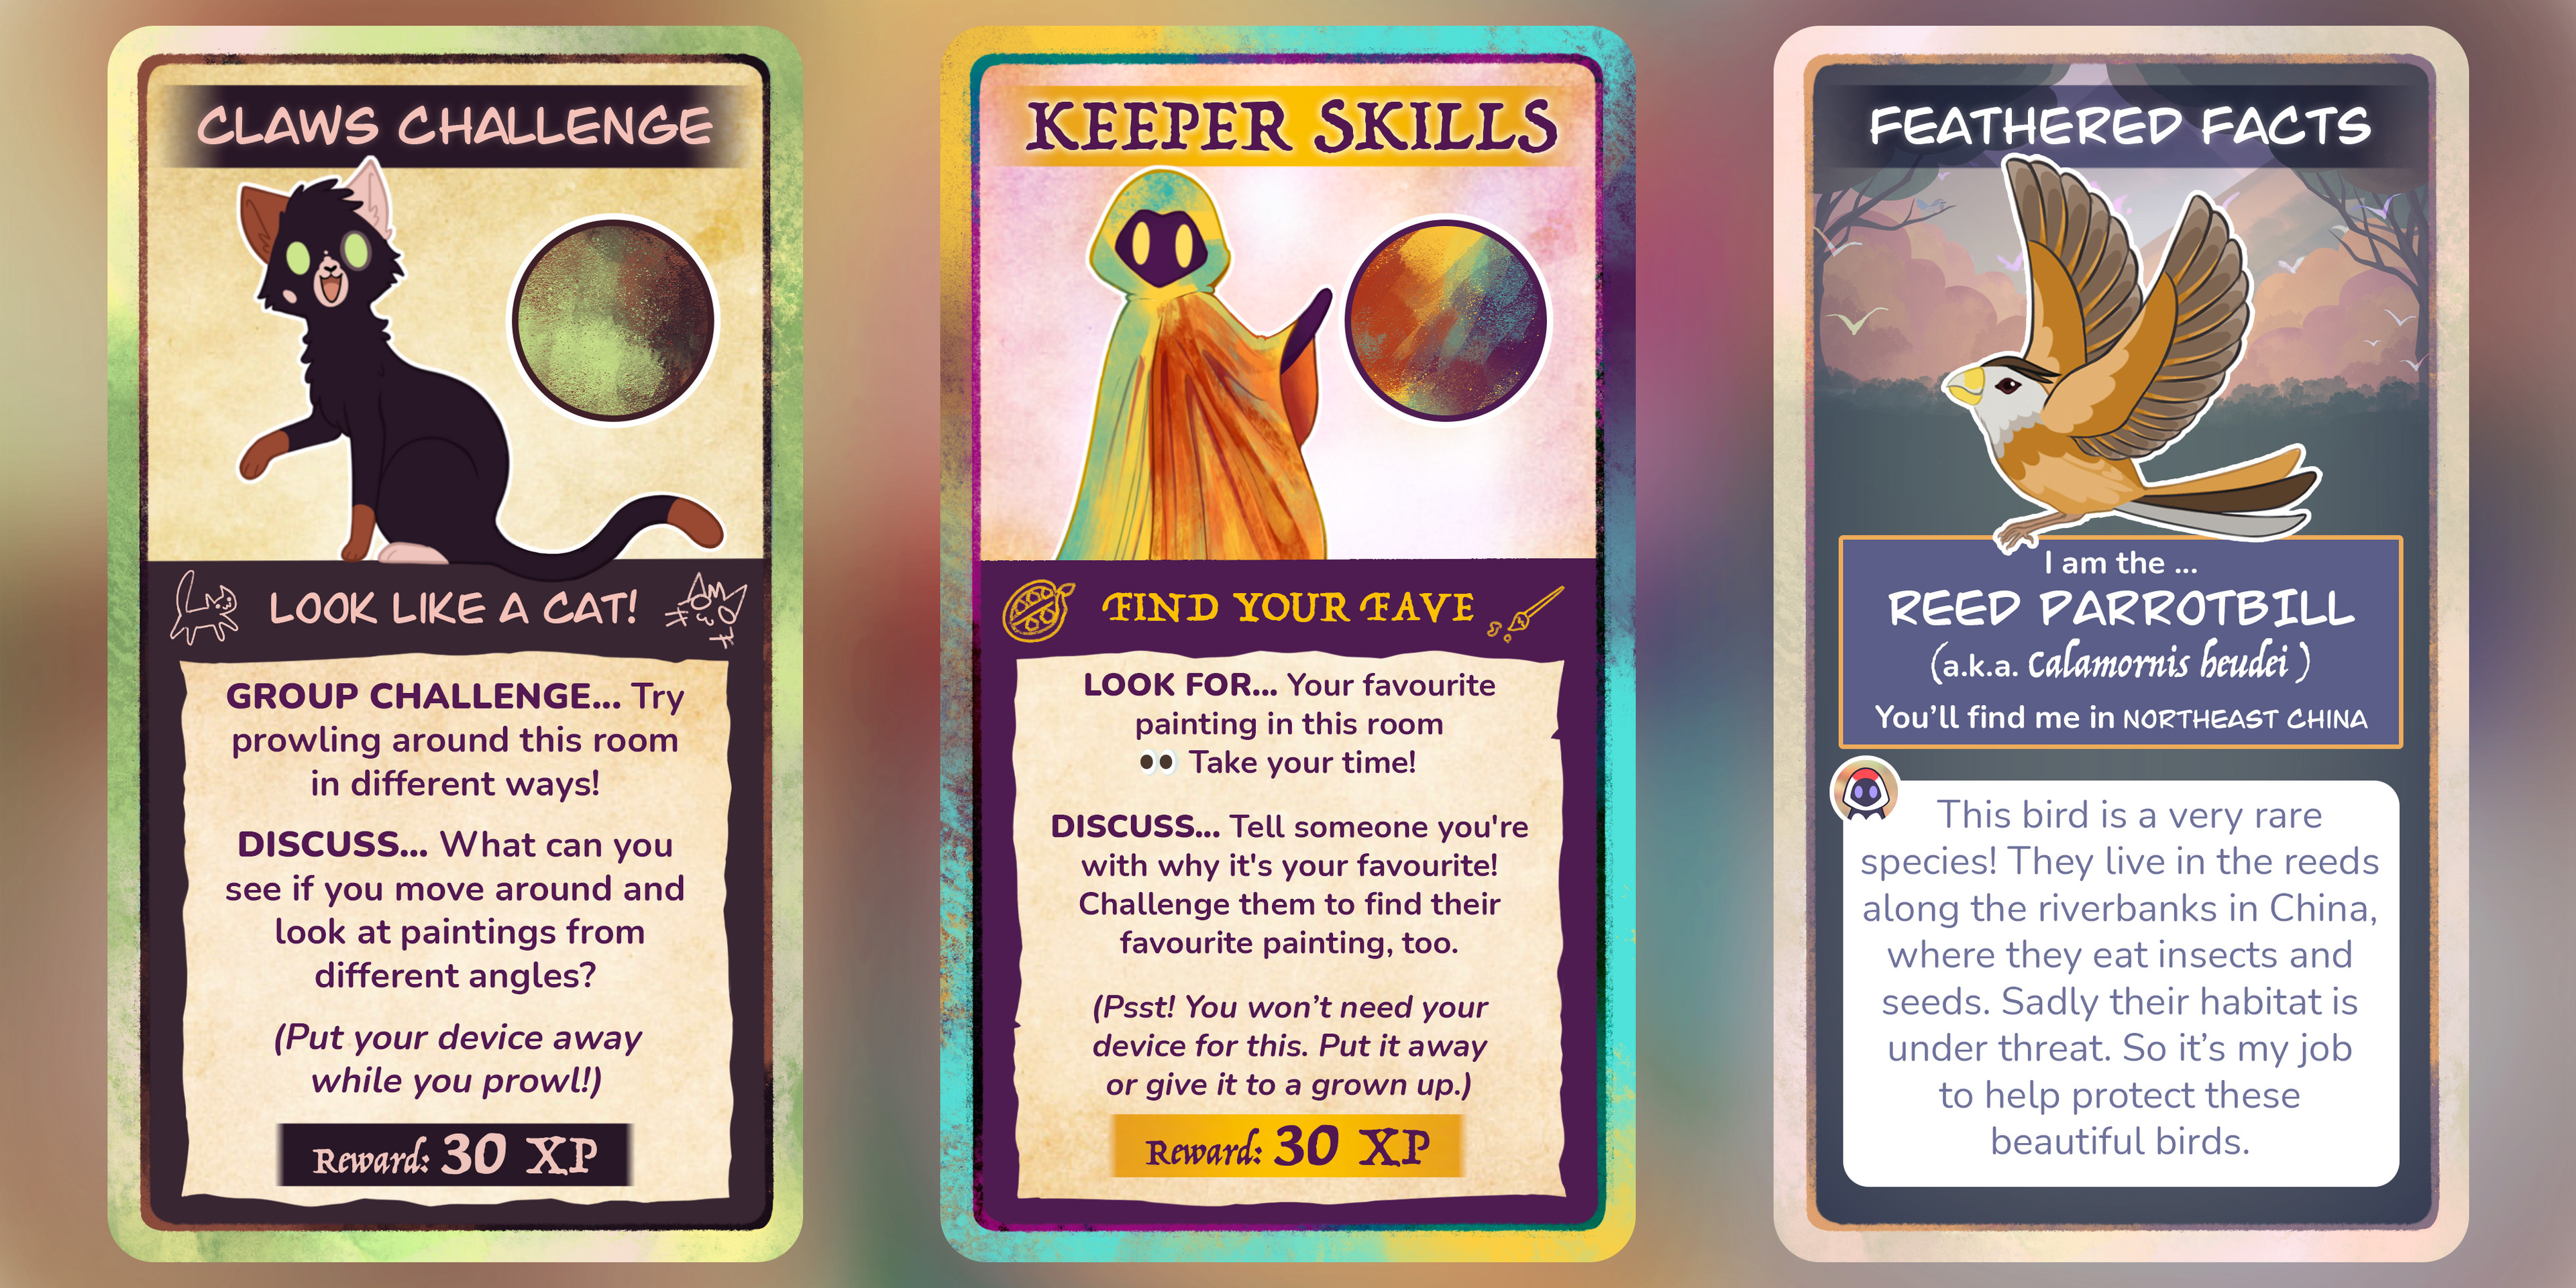 Examples of 'Keeper Skills', ' Feathered Facts' and 'Claws Challenge' cards.